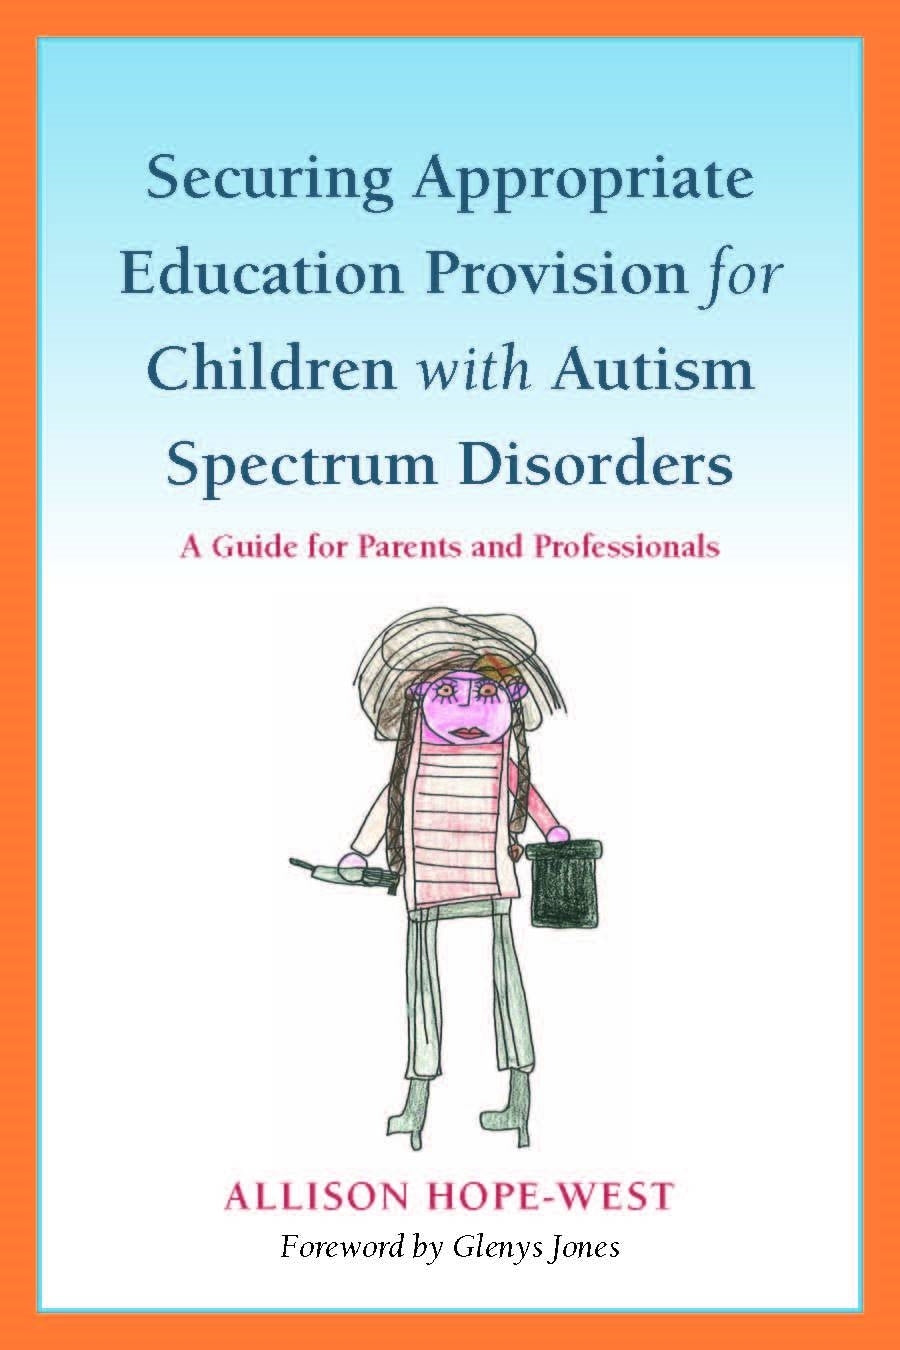 Securing Appropriate Education Provision for Children with Autism Spectrum Disorders by Glenys Jones, Allison Hope-West